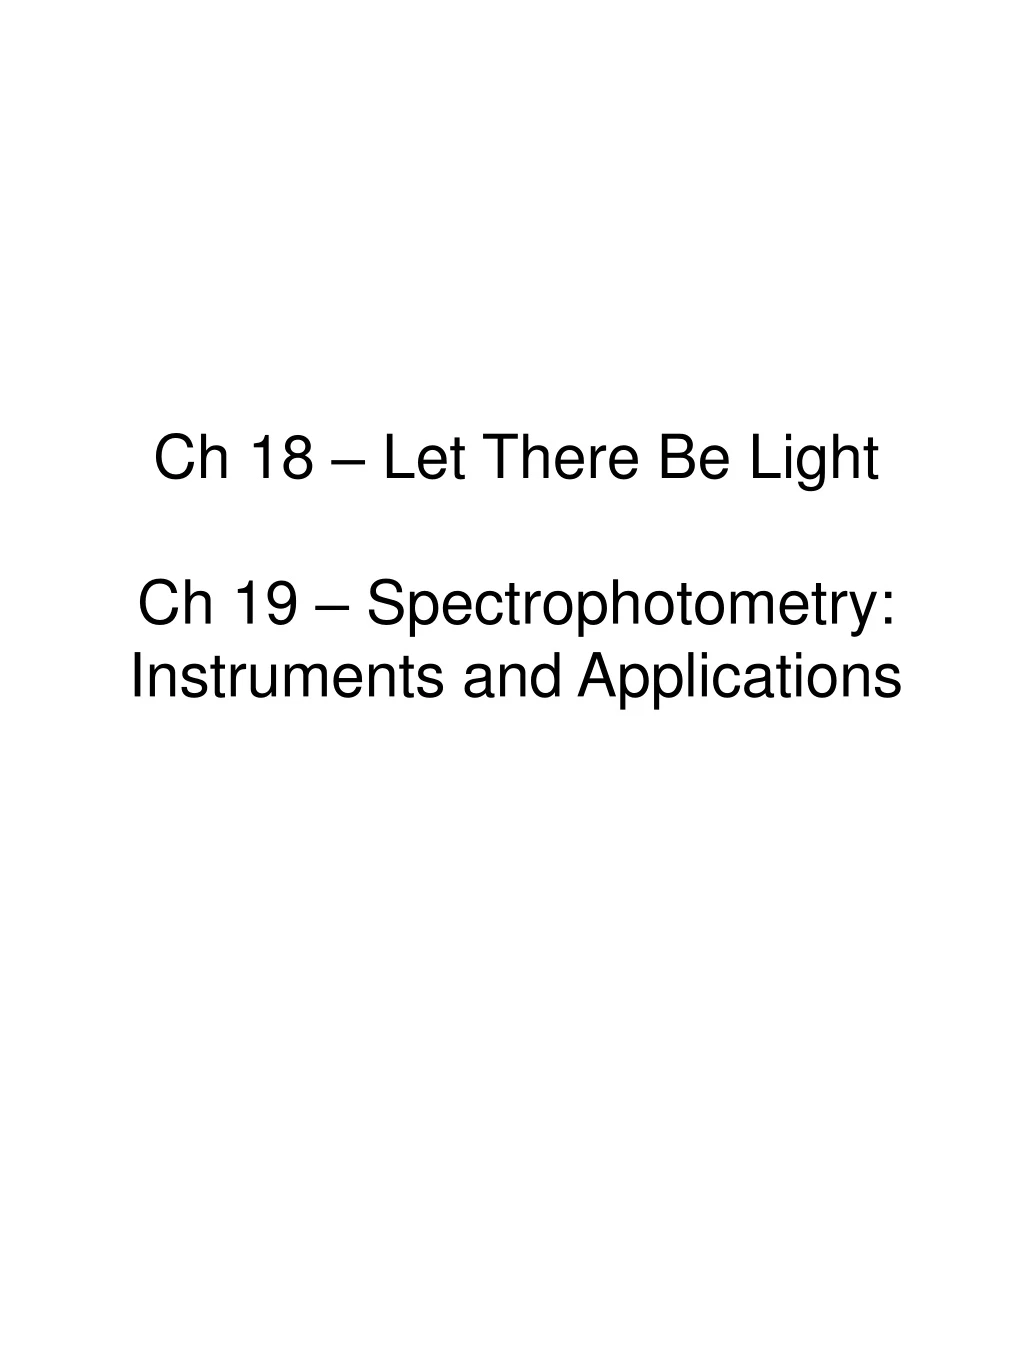 ch 18 let there be light ch 19 spectrophotometry instruments and applications